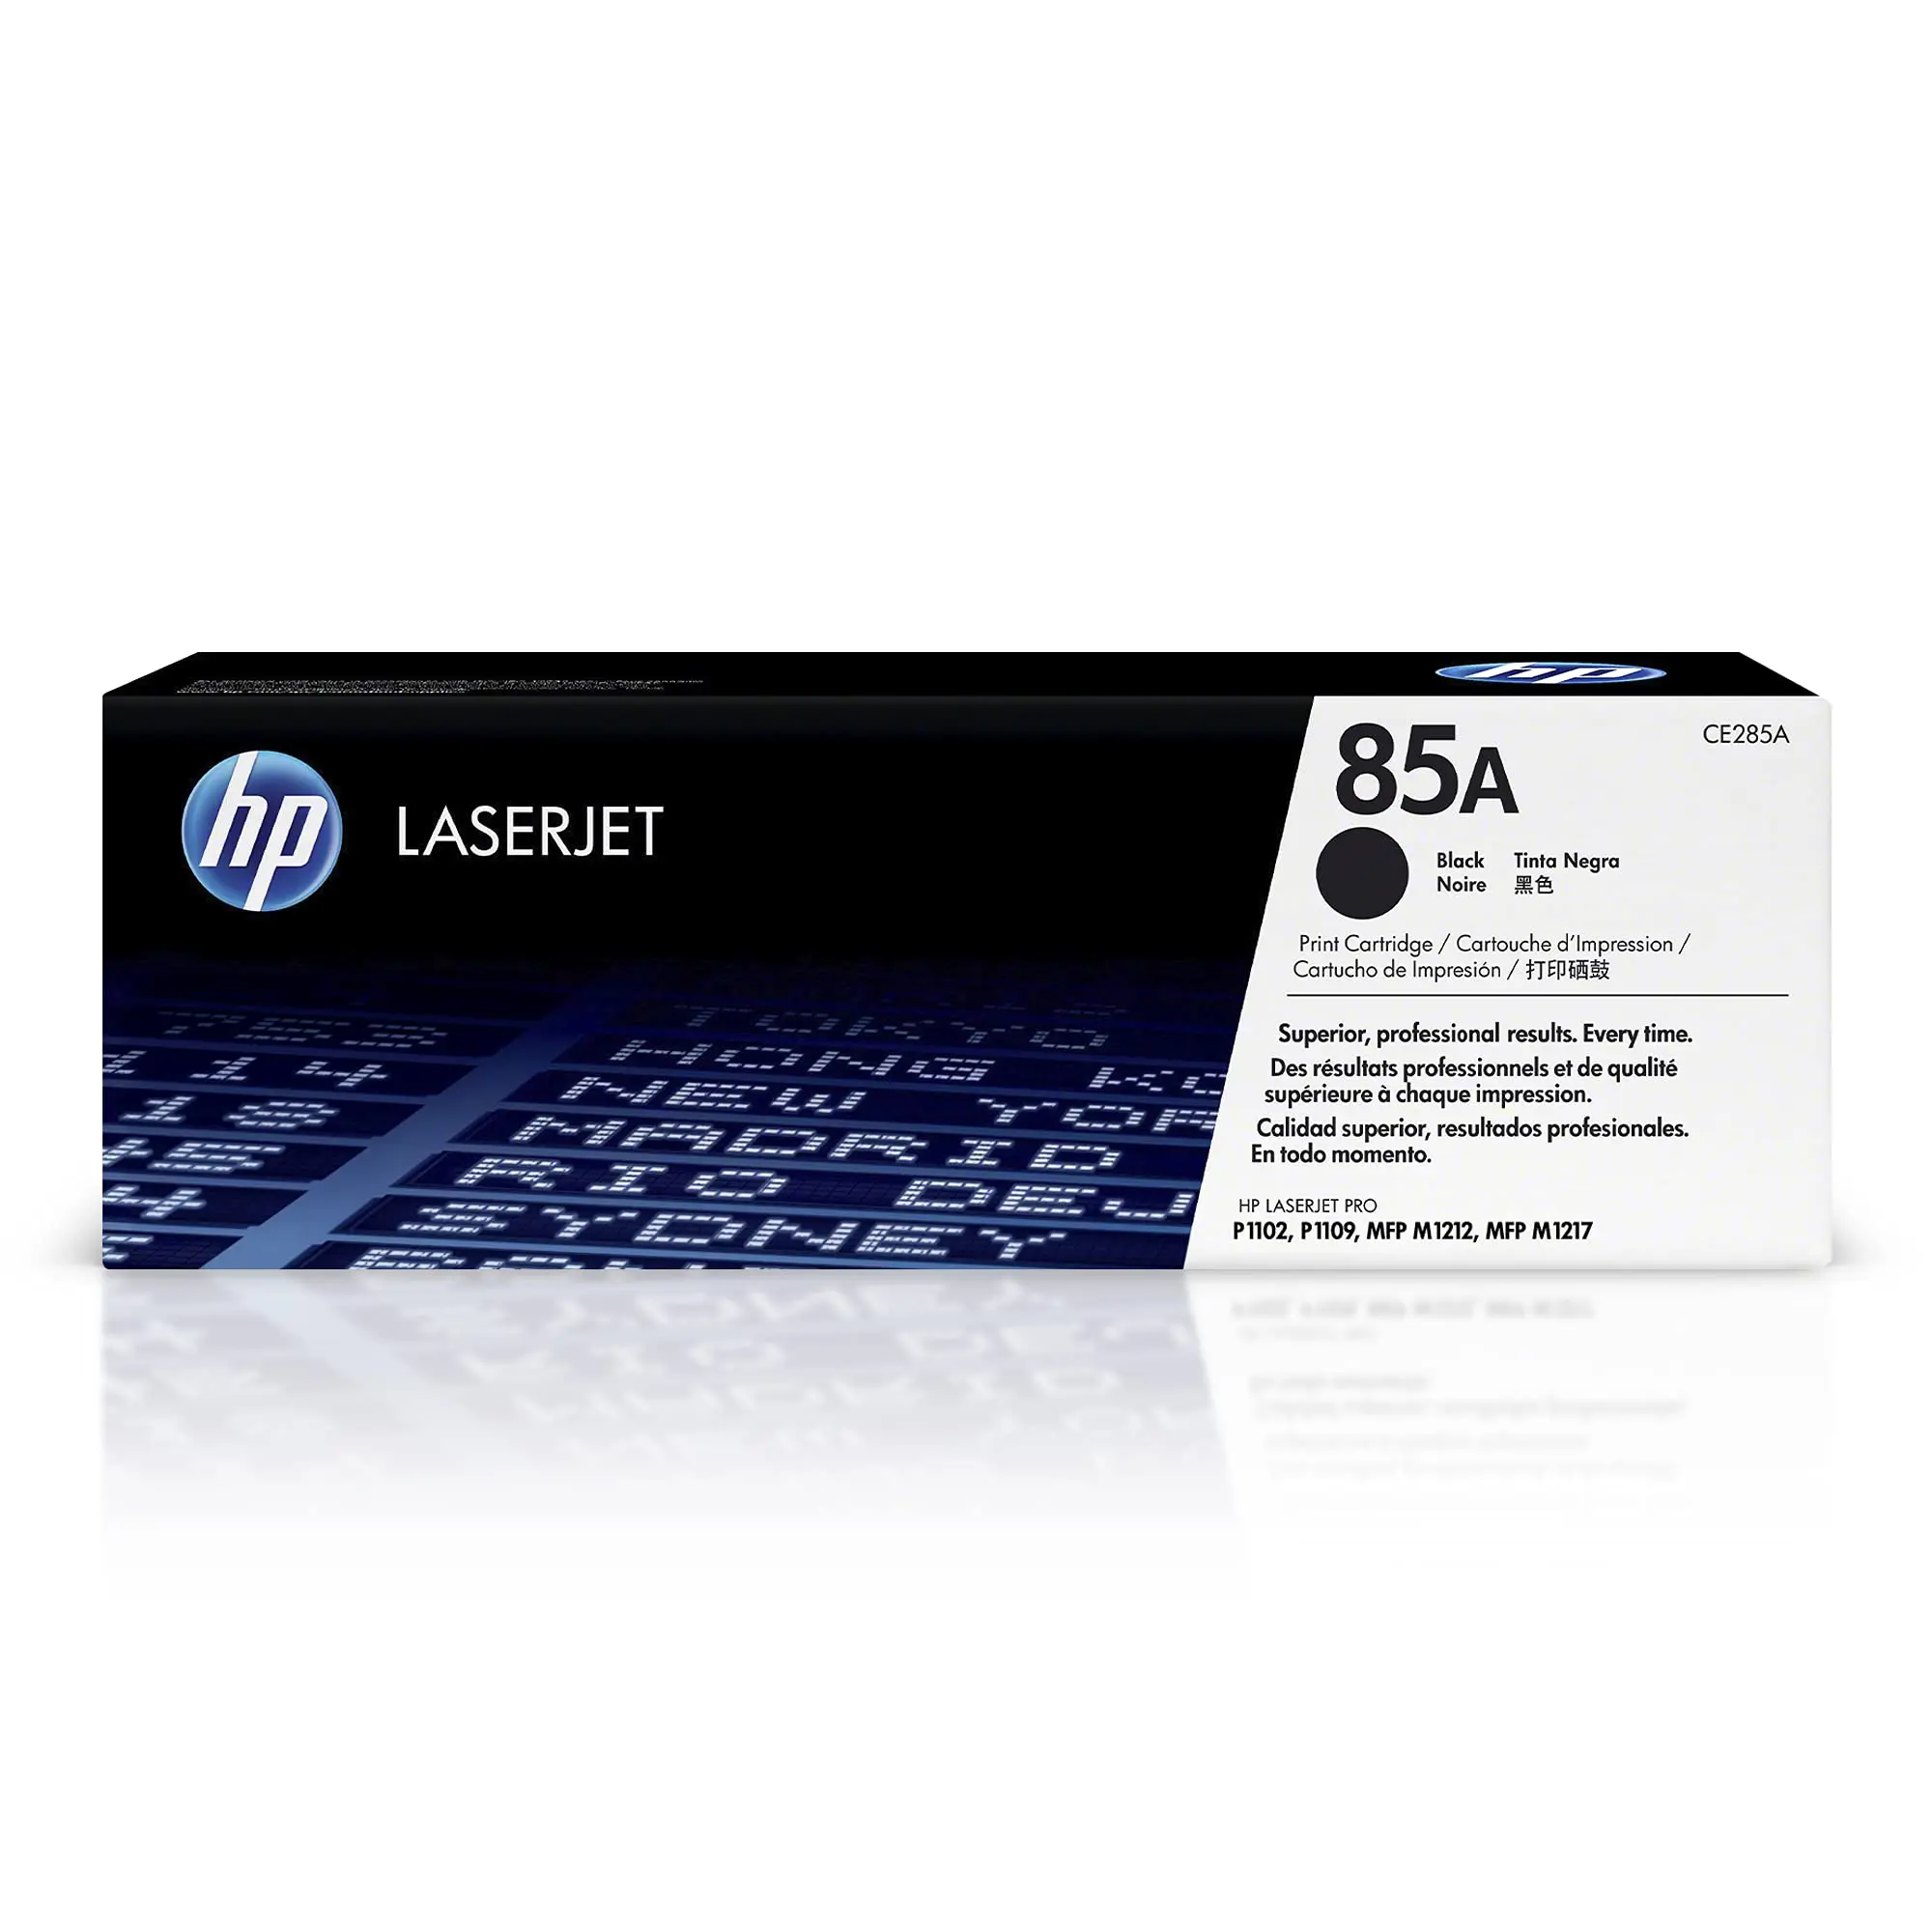 Hp p1102w toner: ultimate guide for high-quality prints